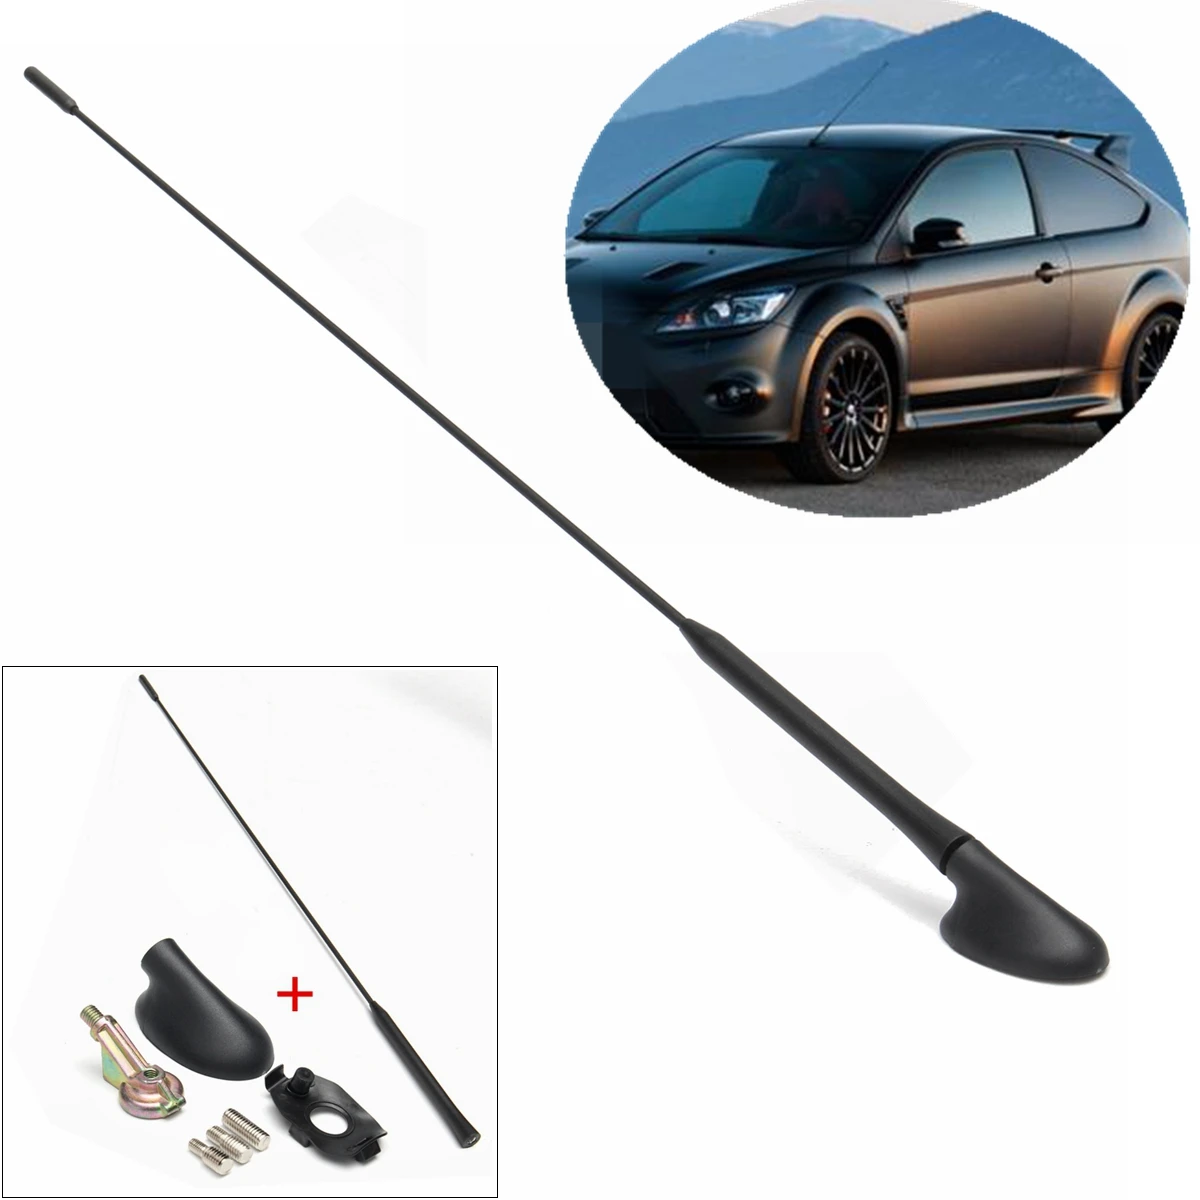 

New AM/FM Car Radio Roof Antenna Aerials Mast + Base Kit For Ford For Focus Models 2000-2007 XS8Z-18919-AA XS8Z18919AA